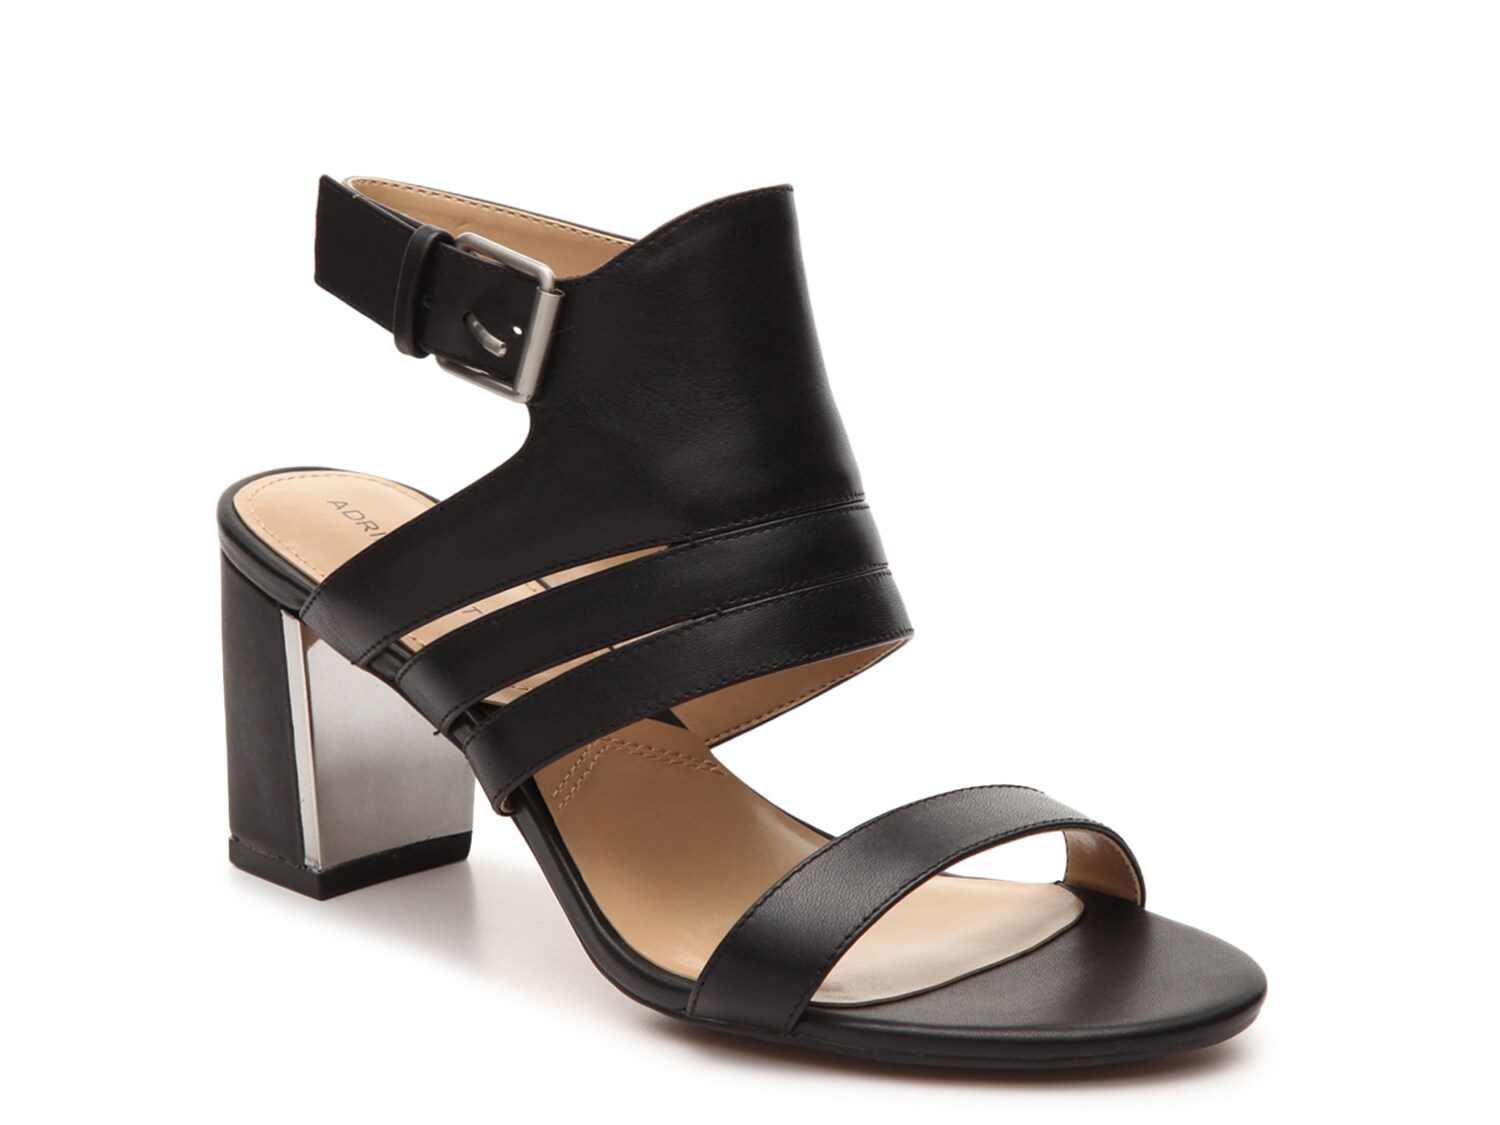 Adrienne Vittadini Pilly Sandal - Free Shipping | DSW